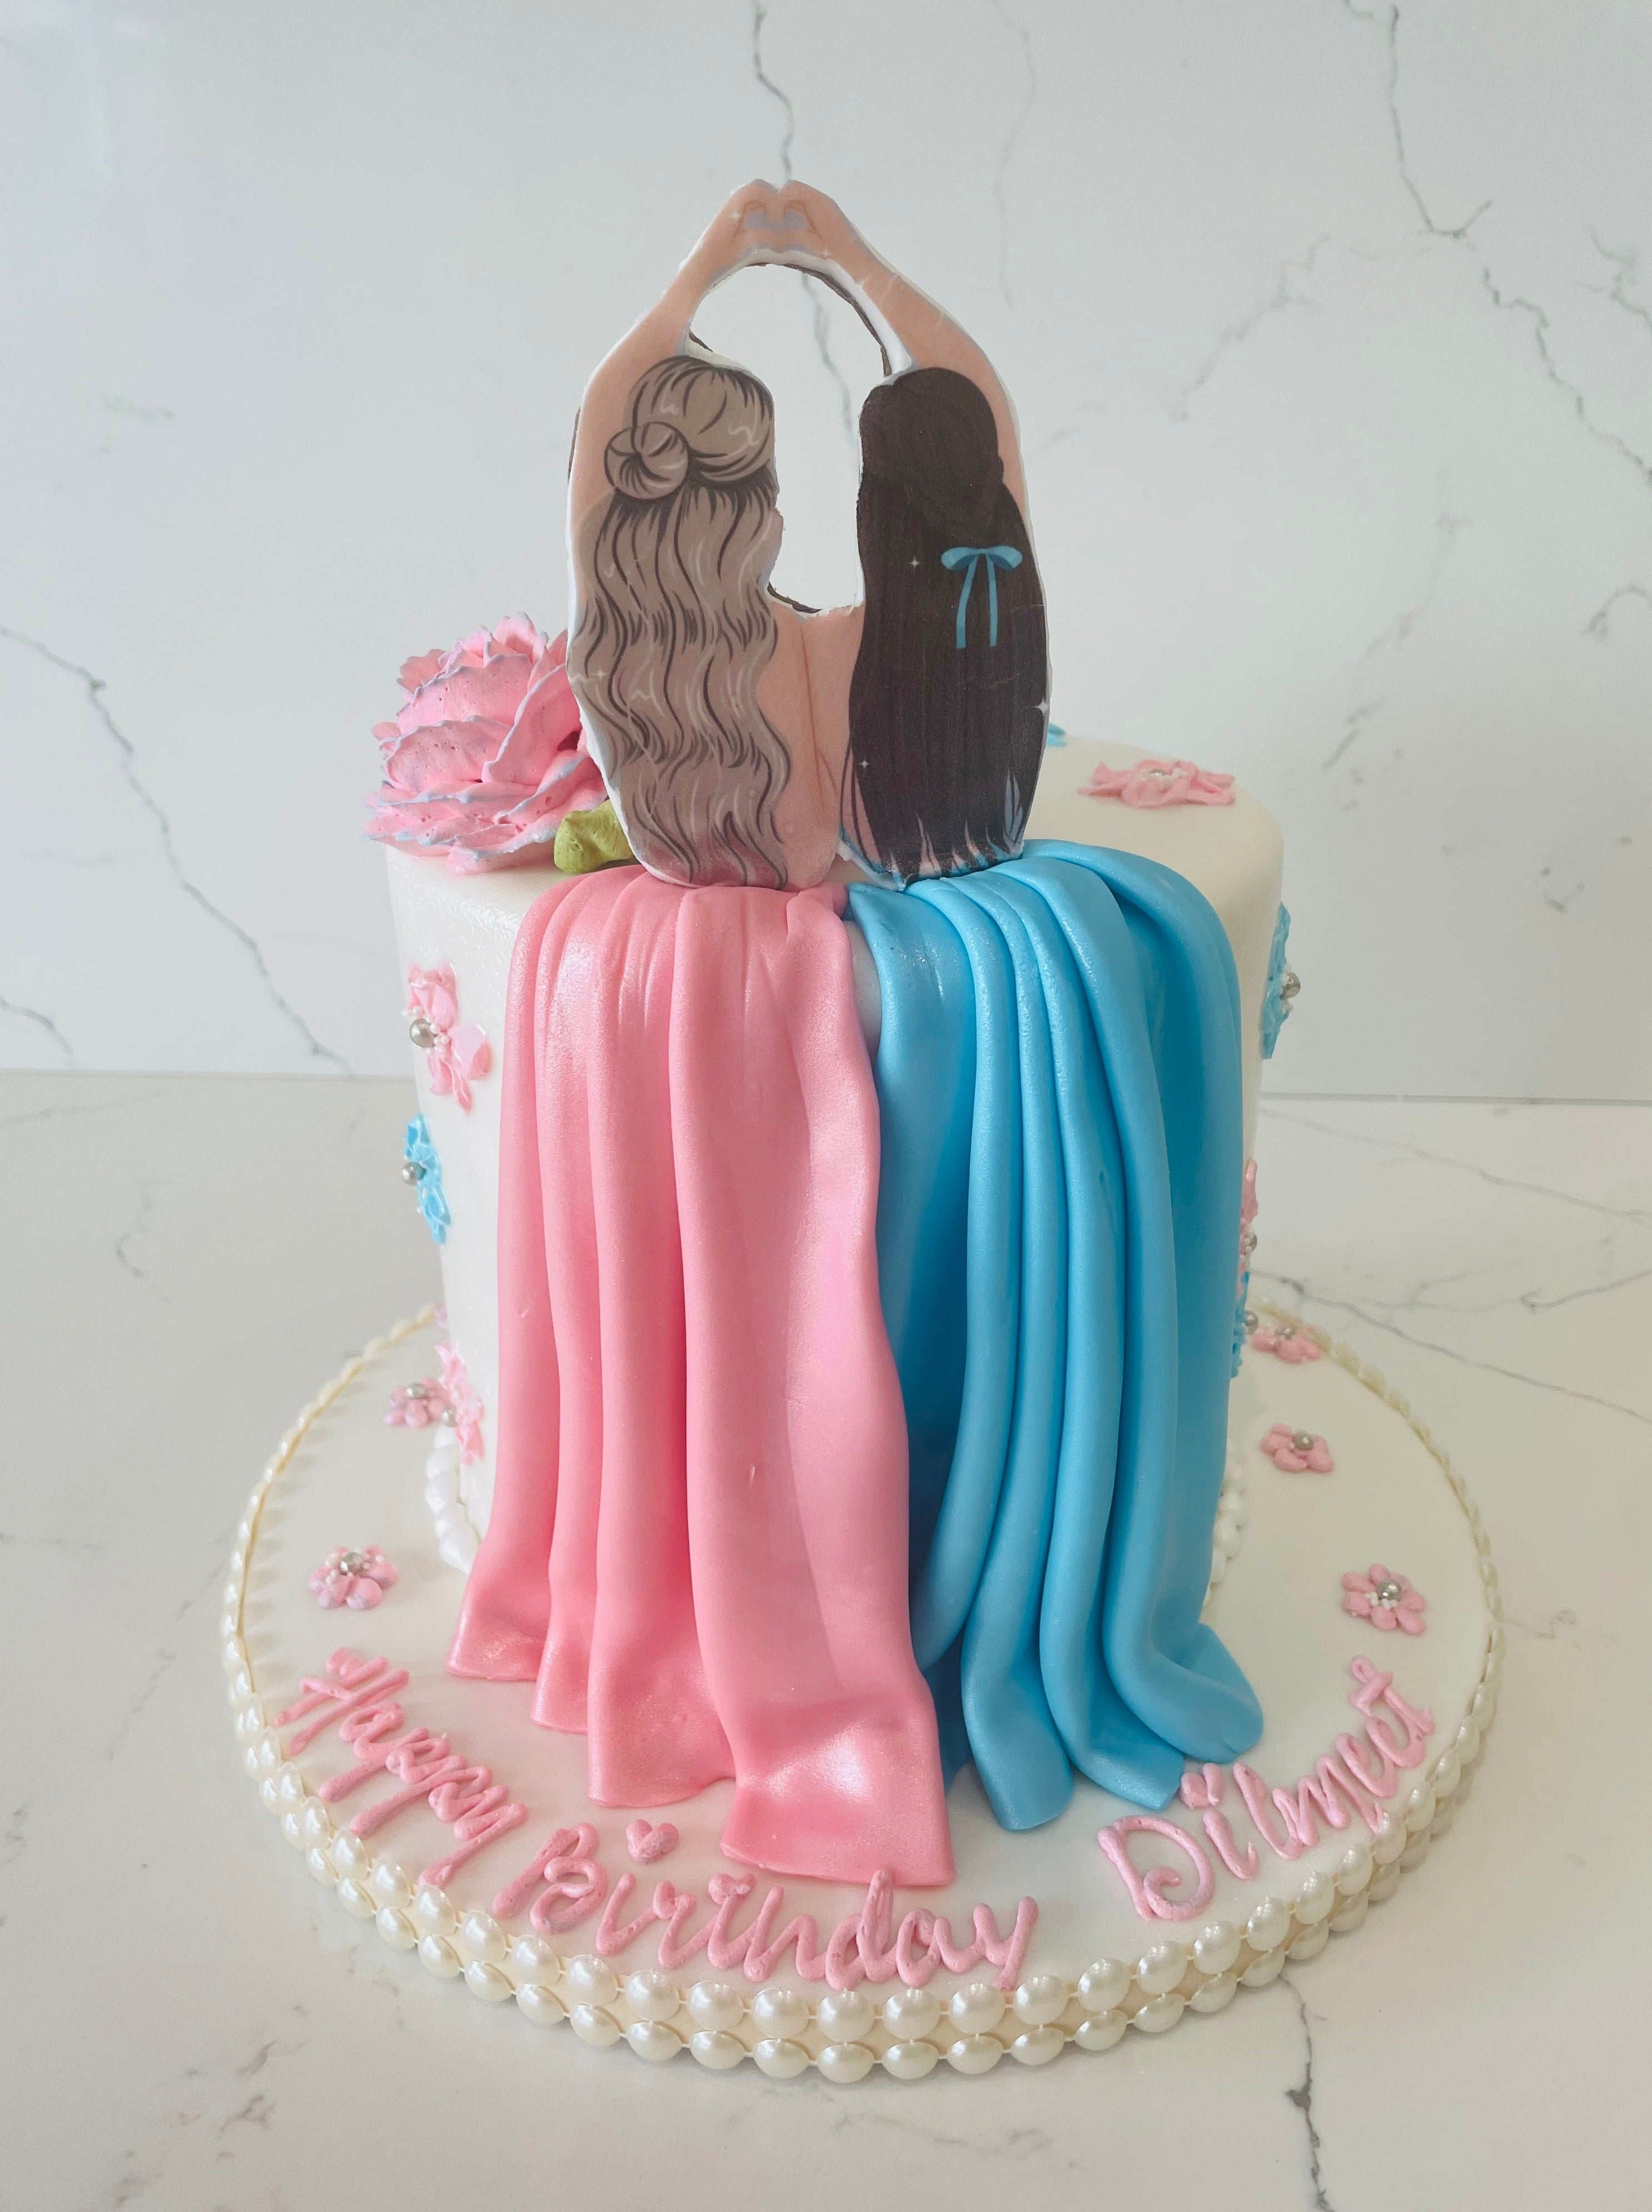 BFF CAKE - Friendship Day - Cakes ::